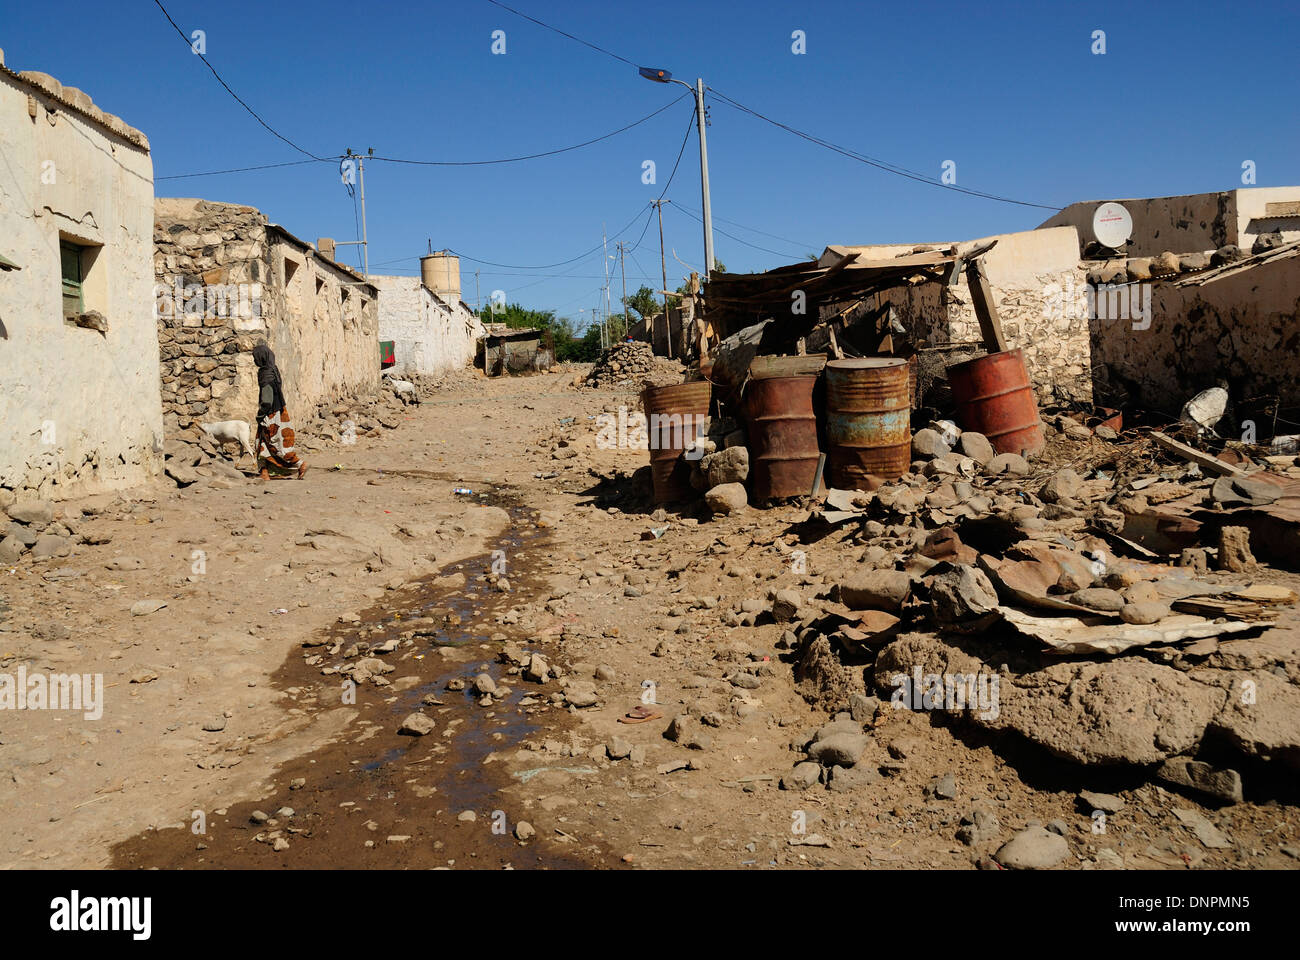 Houses of Dikhil town in the south of Djibouti, Horn of Africa Stock Photo